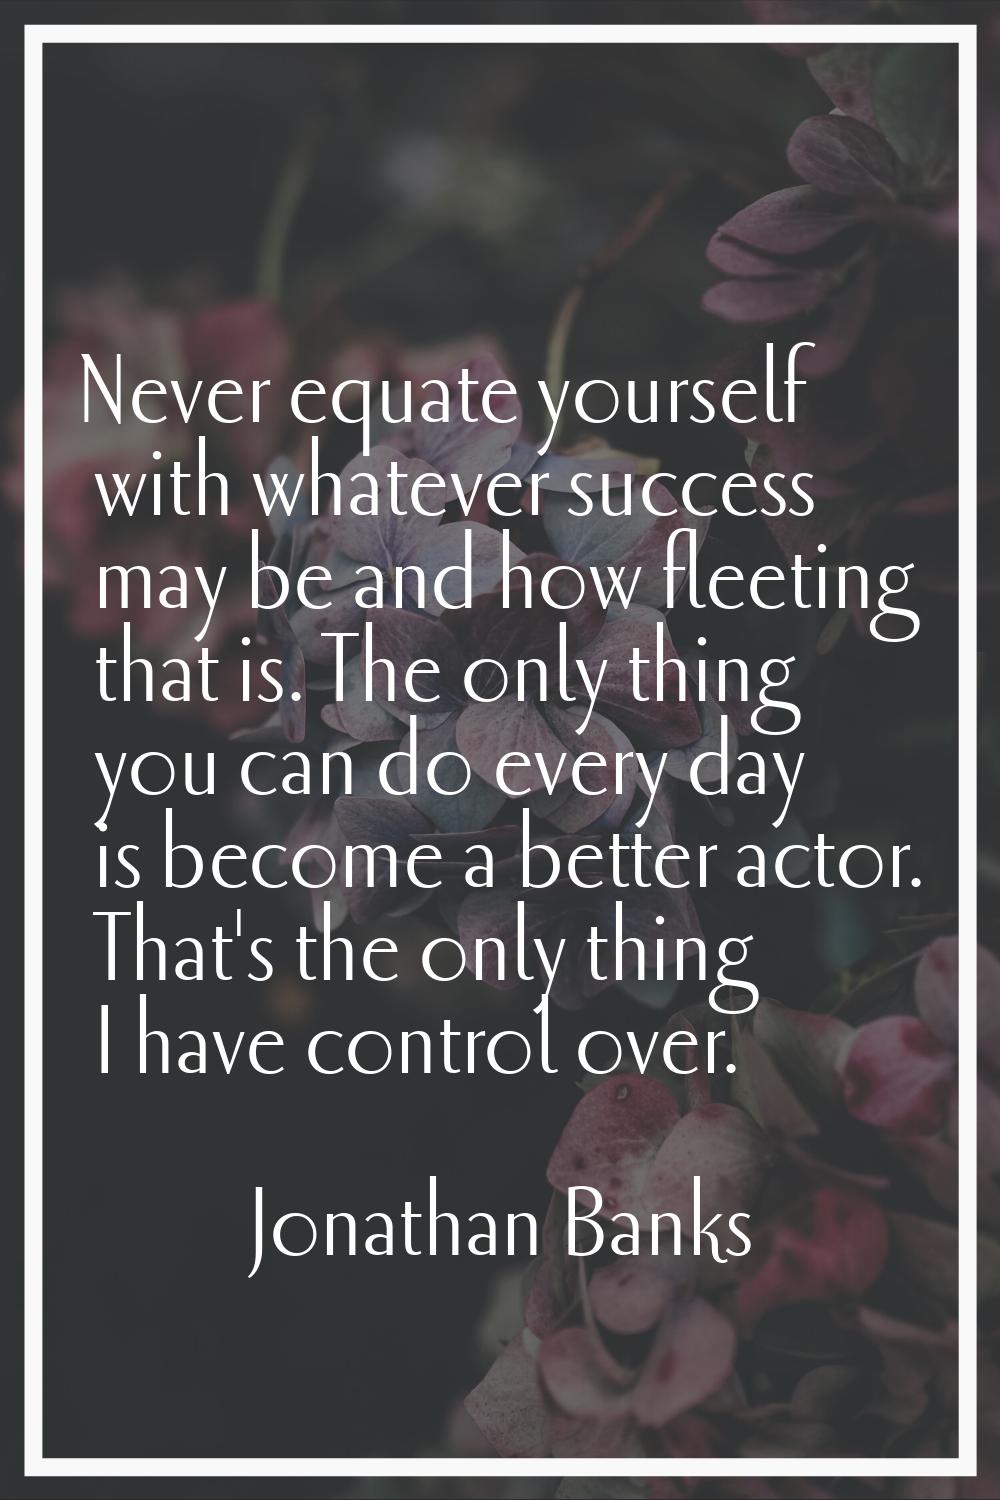 Never equate yourself with whatever success may be and how fleeting that is. The only thing you can